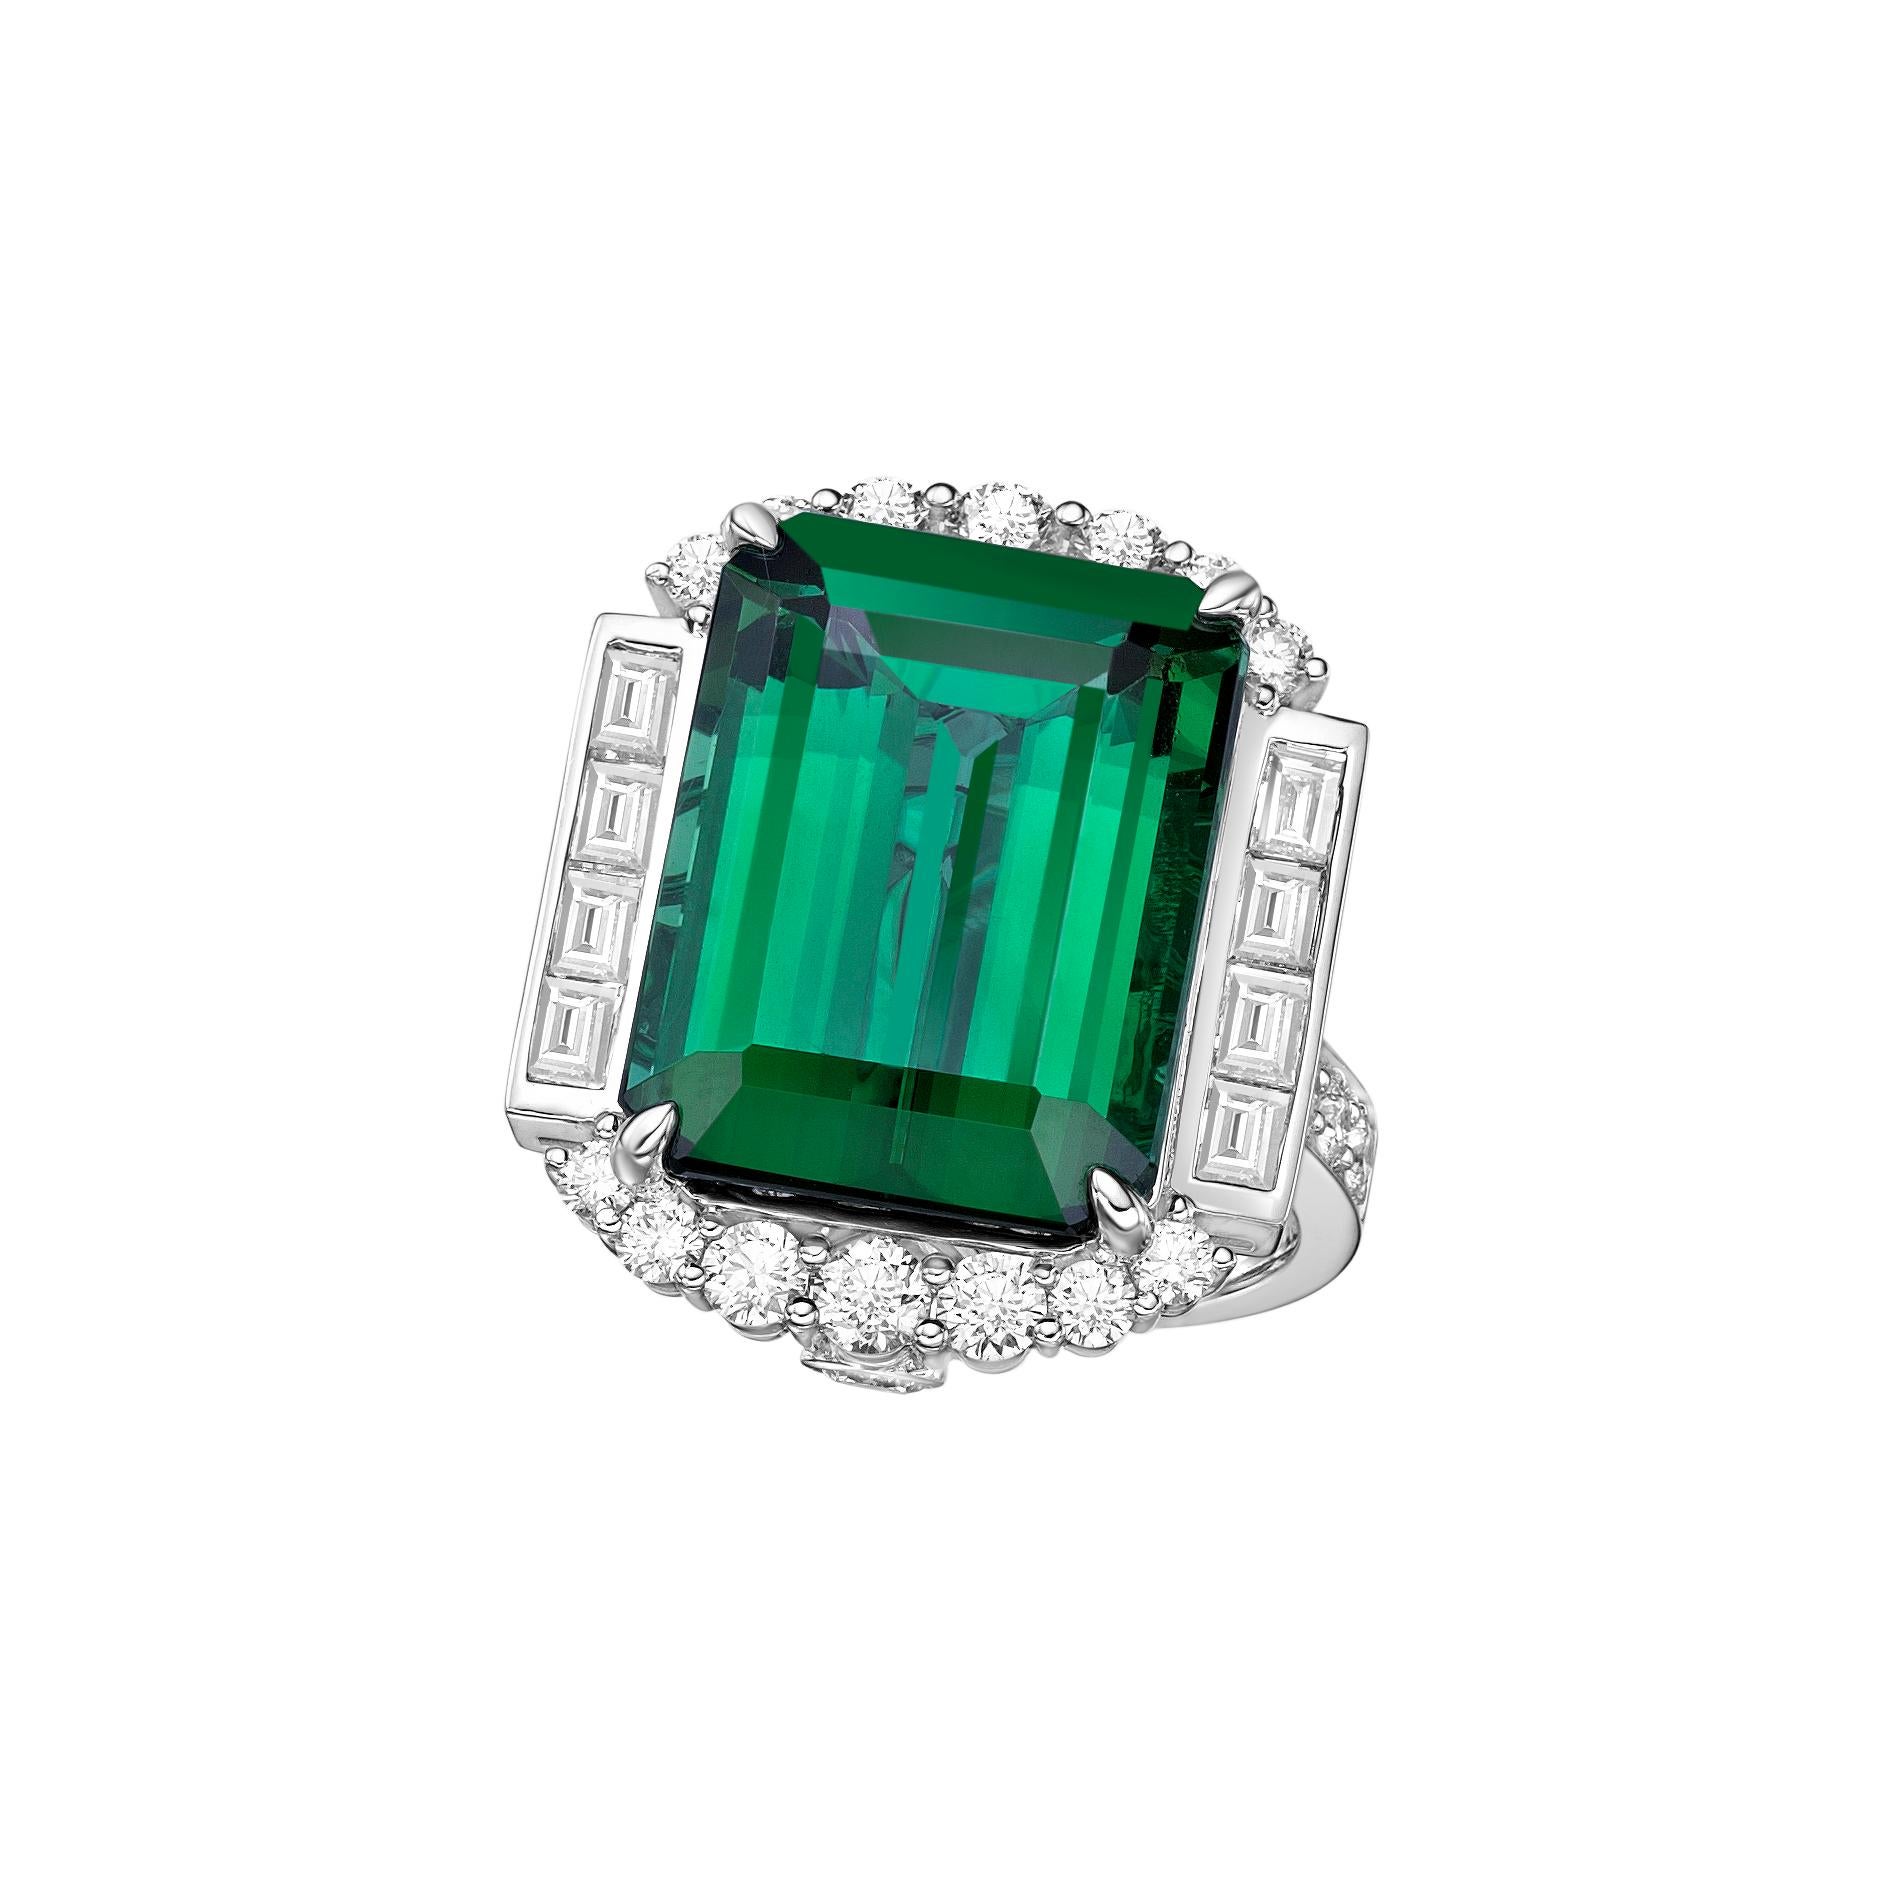 Octagon Cut 15.67 Carat Green Tourmaline Ring in 18Karat White Gold with Diamond.  For Sale